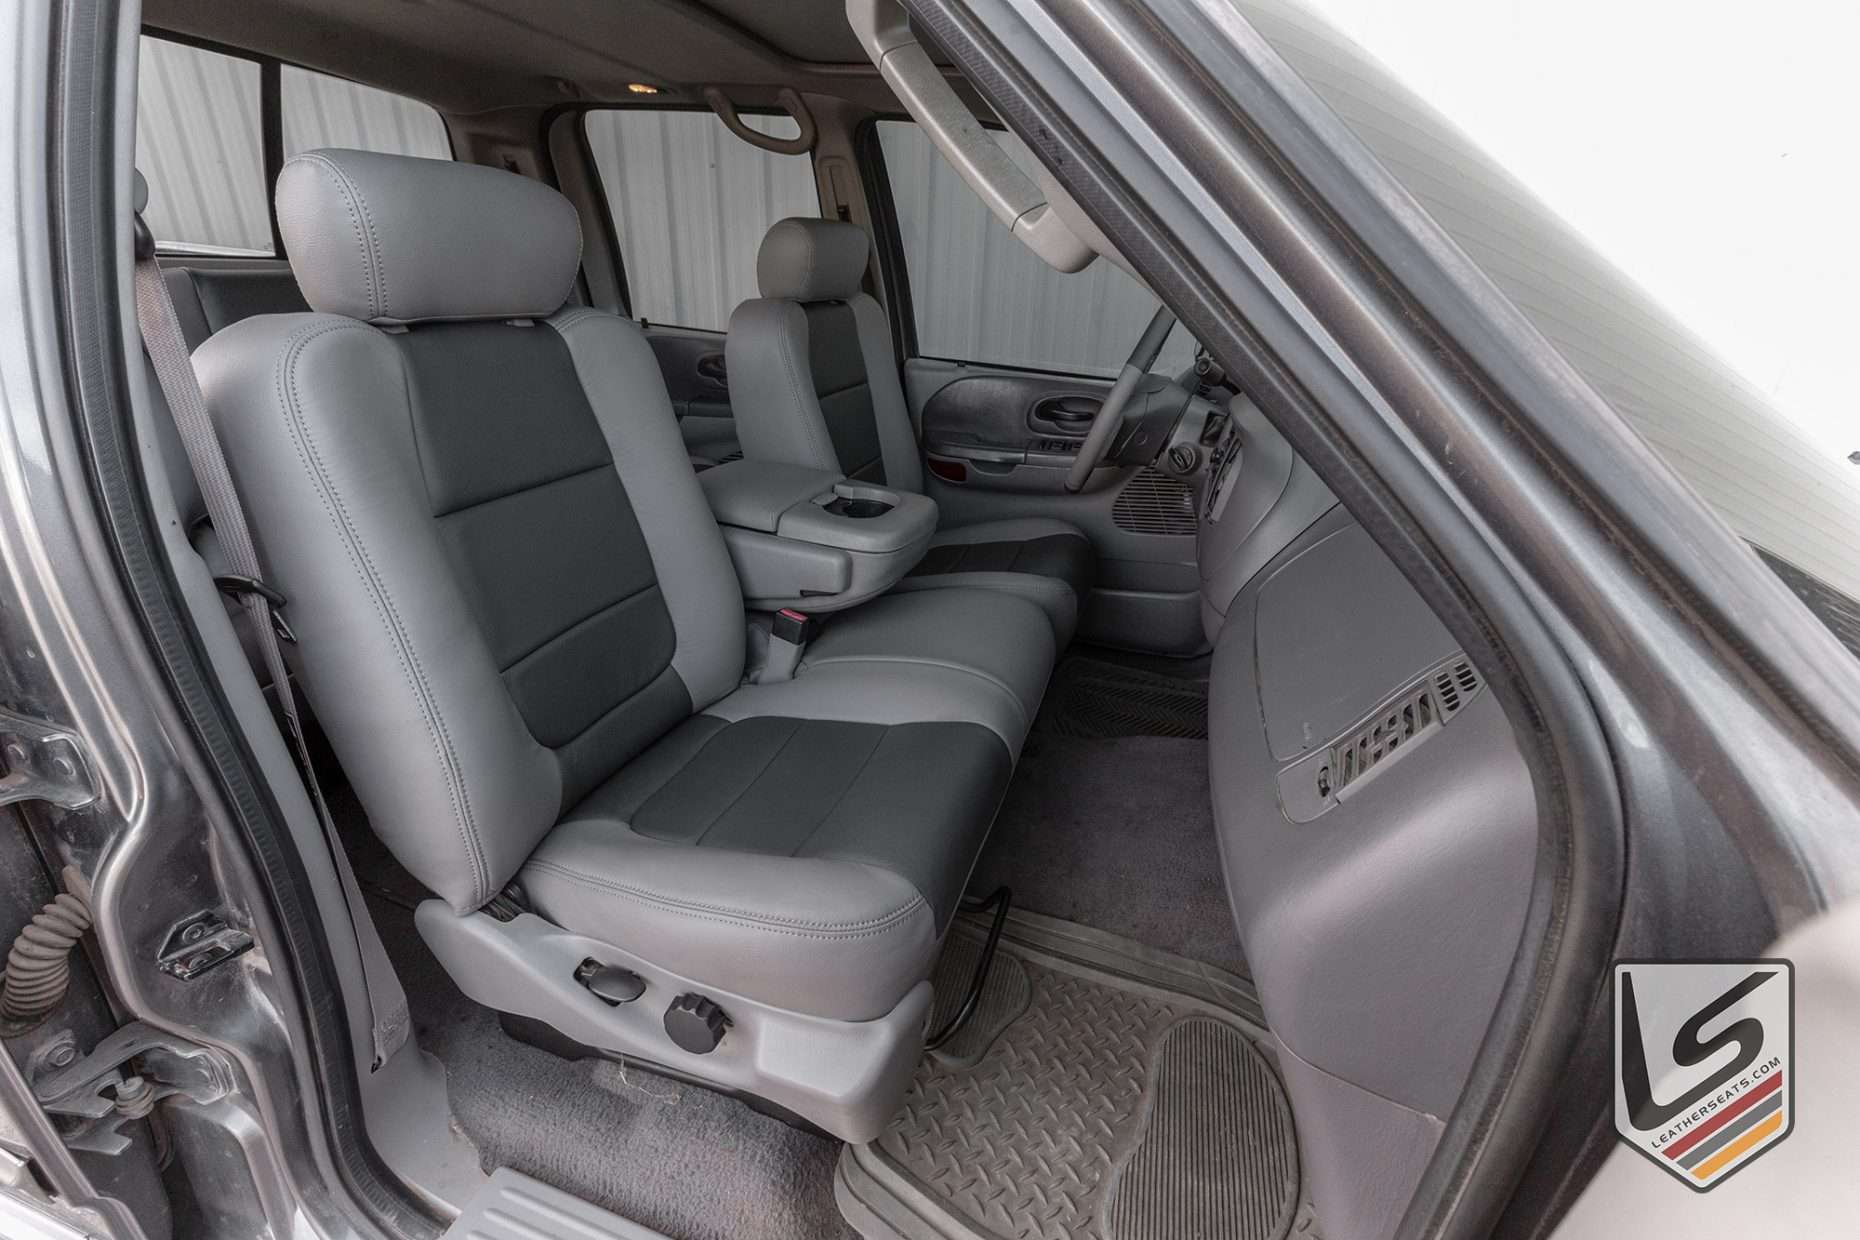 Wide view of front passenger seat